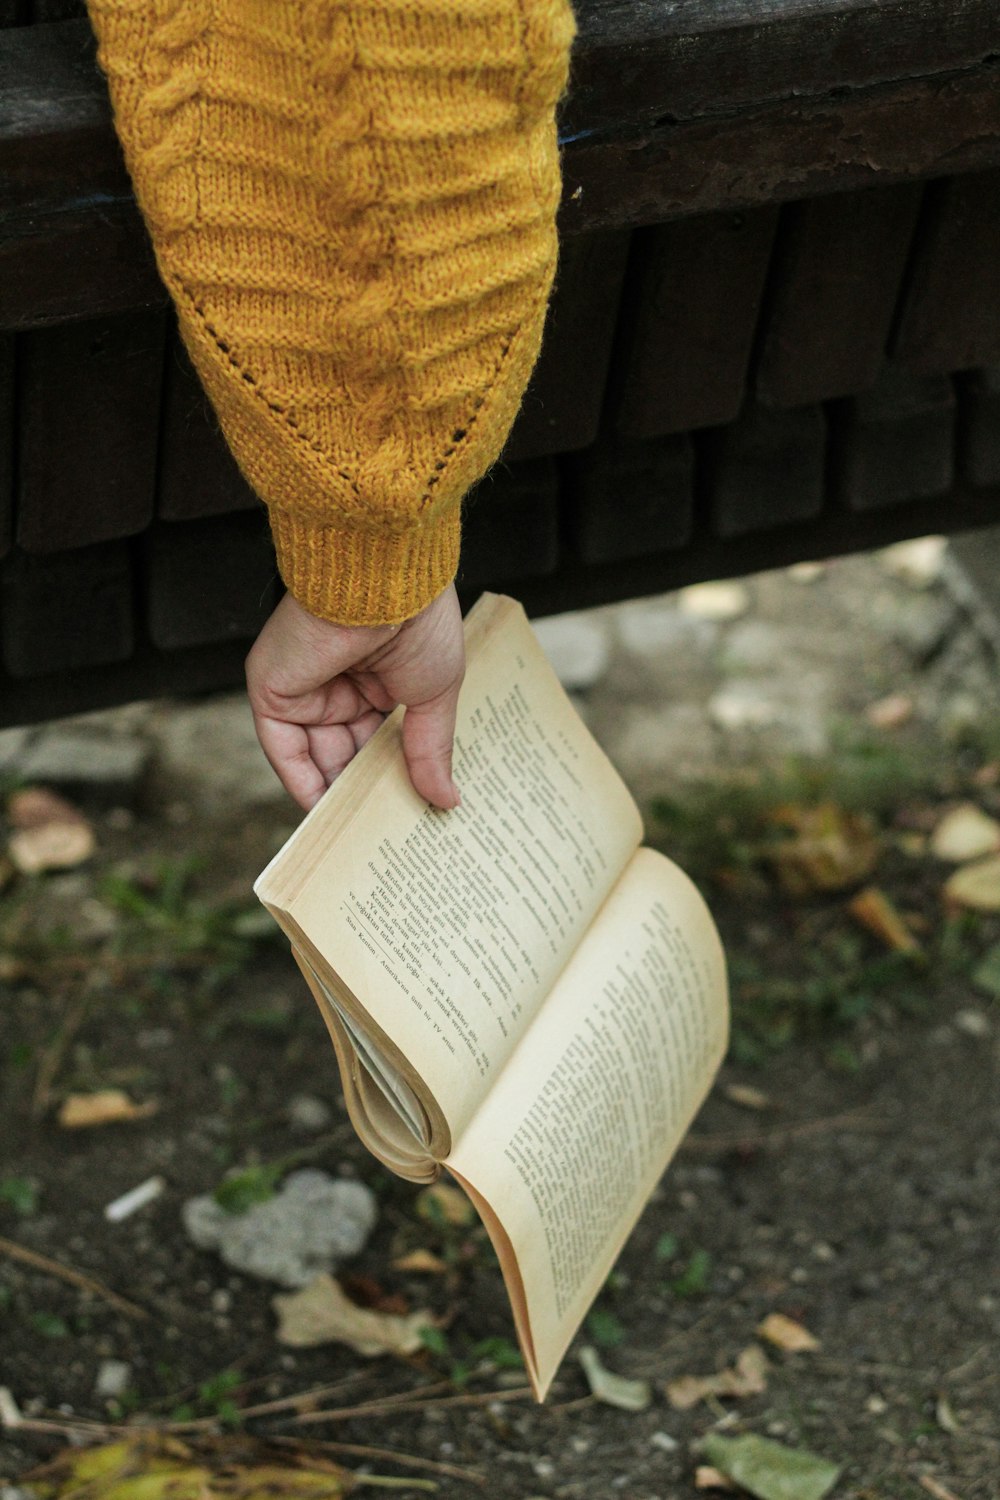 a person holding an open book in their hand